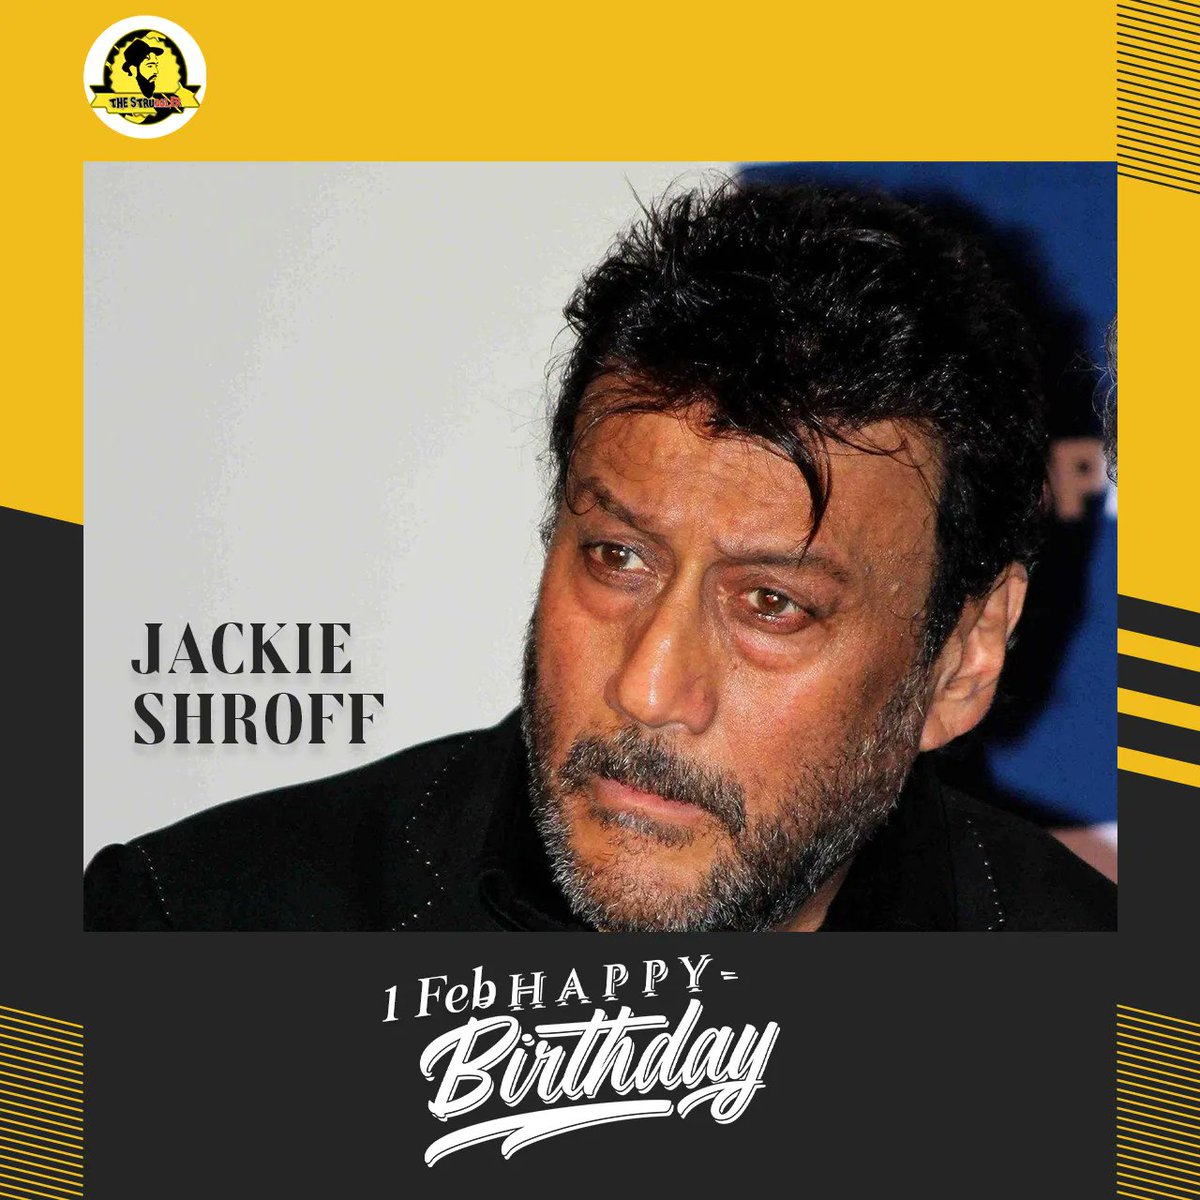 Jaikishan Kakubhai Shroff, popularly known as Jackie Shroff, is an Indian actor and former model. 

#thestruggler, #thestrugglerofficial #bollywoodactorbirthday #actorbirthday #JaikishanKakubhaiShroff,   #JackieShroffbirthday #bollywoodcelebritybirthday #celebritybirthday